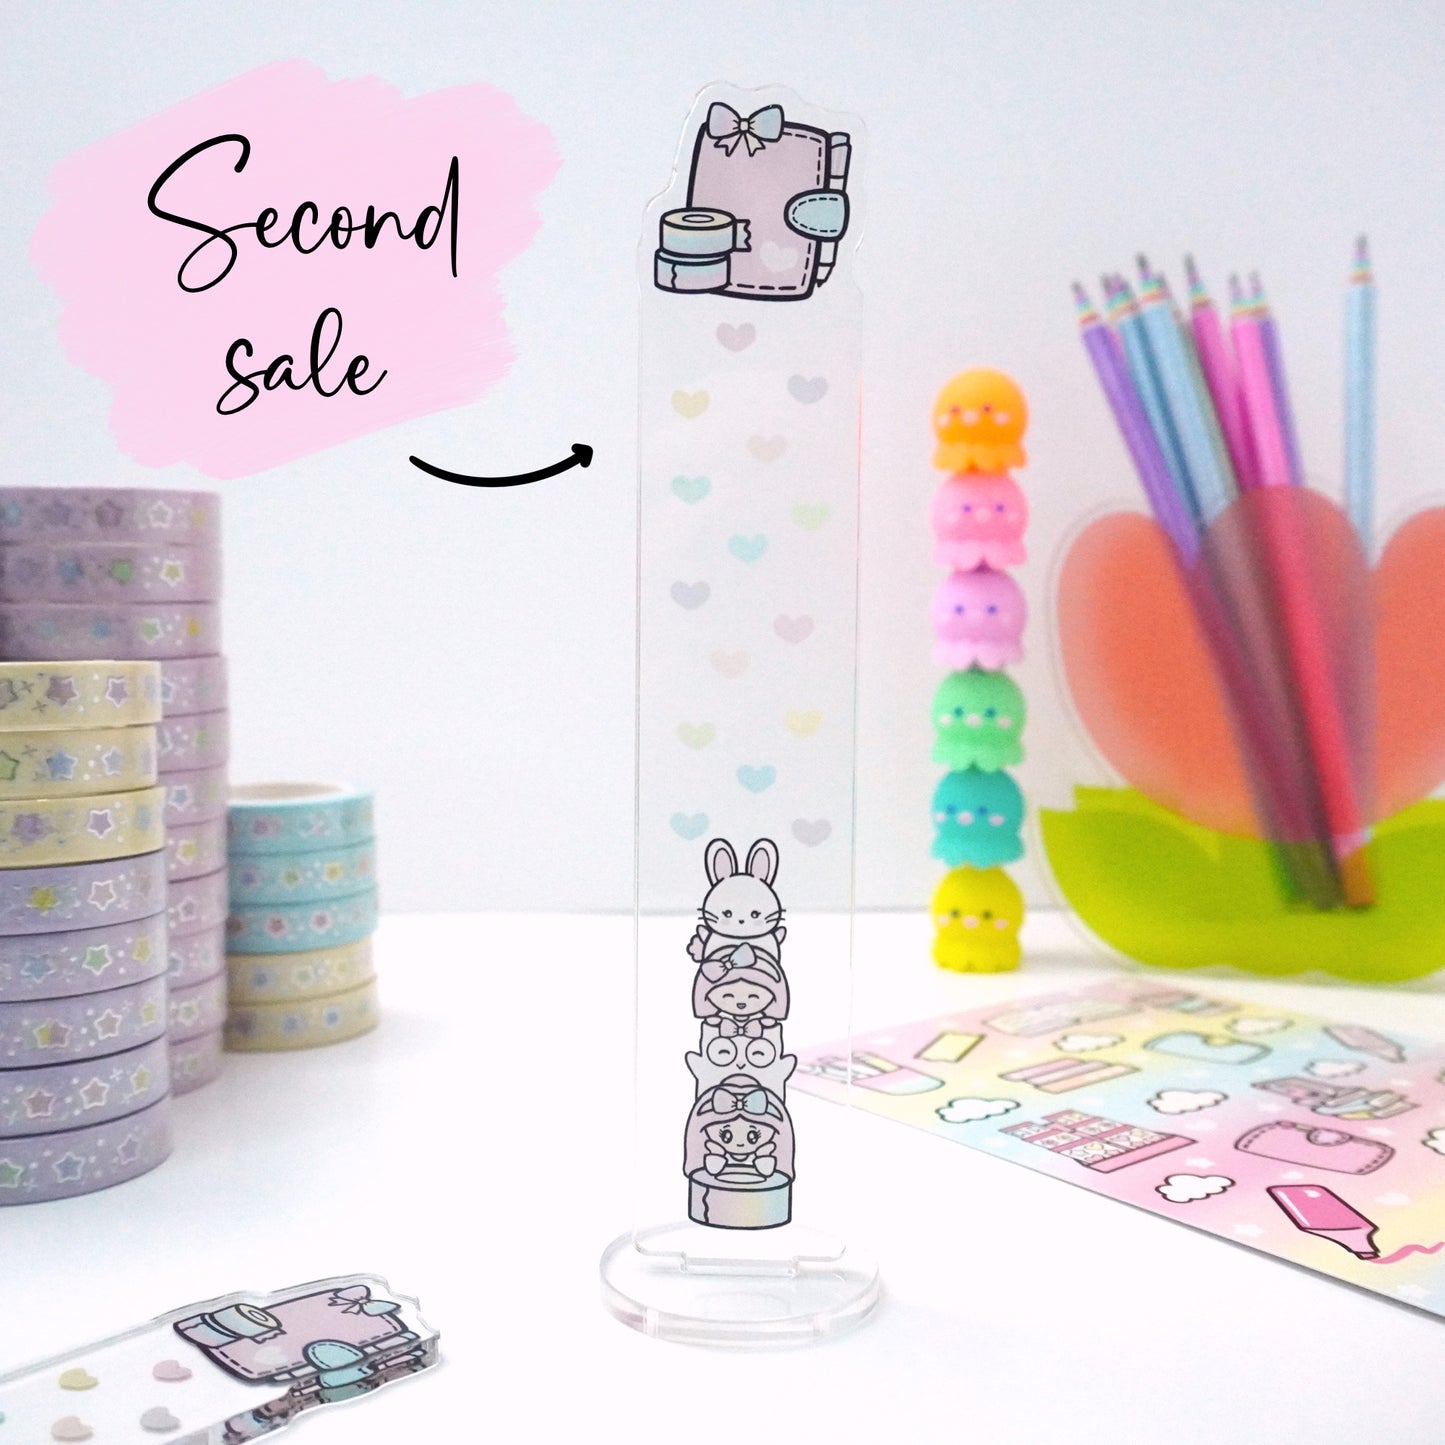 Second sale! | Planner friends | Acrylic Washi Stand